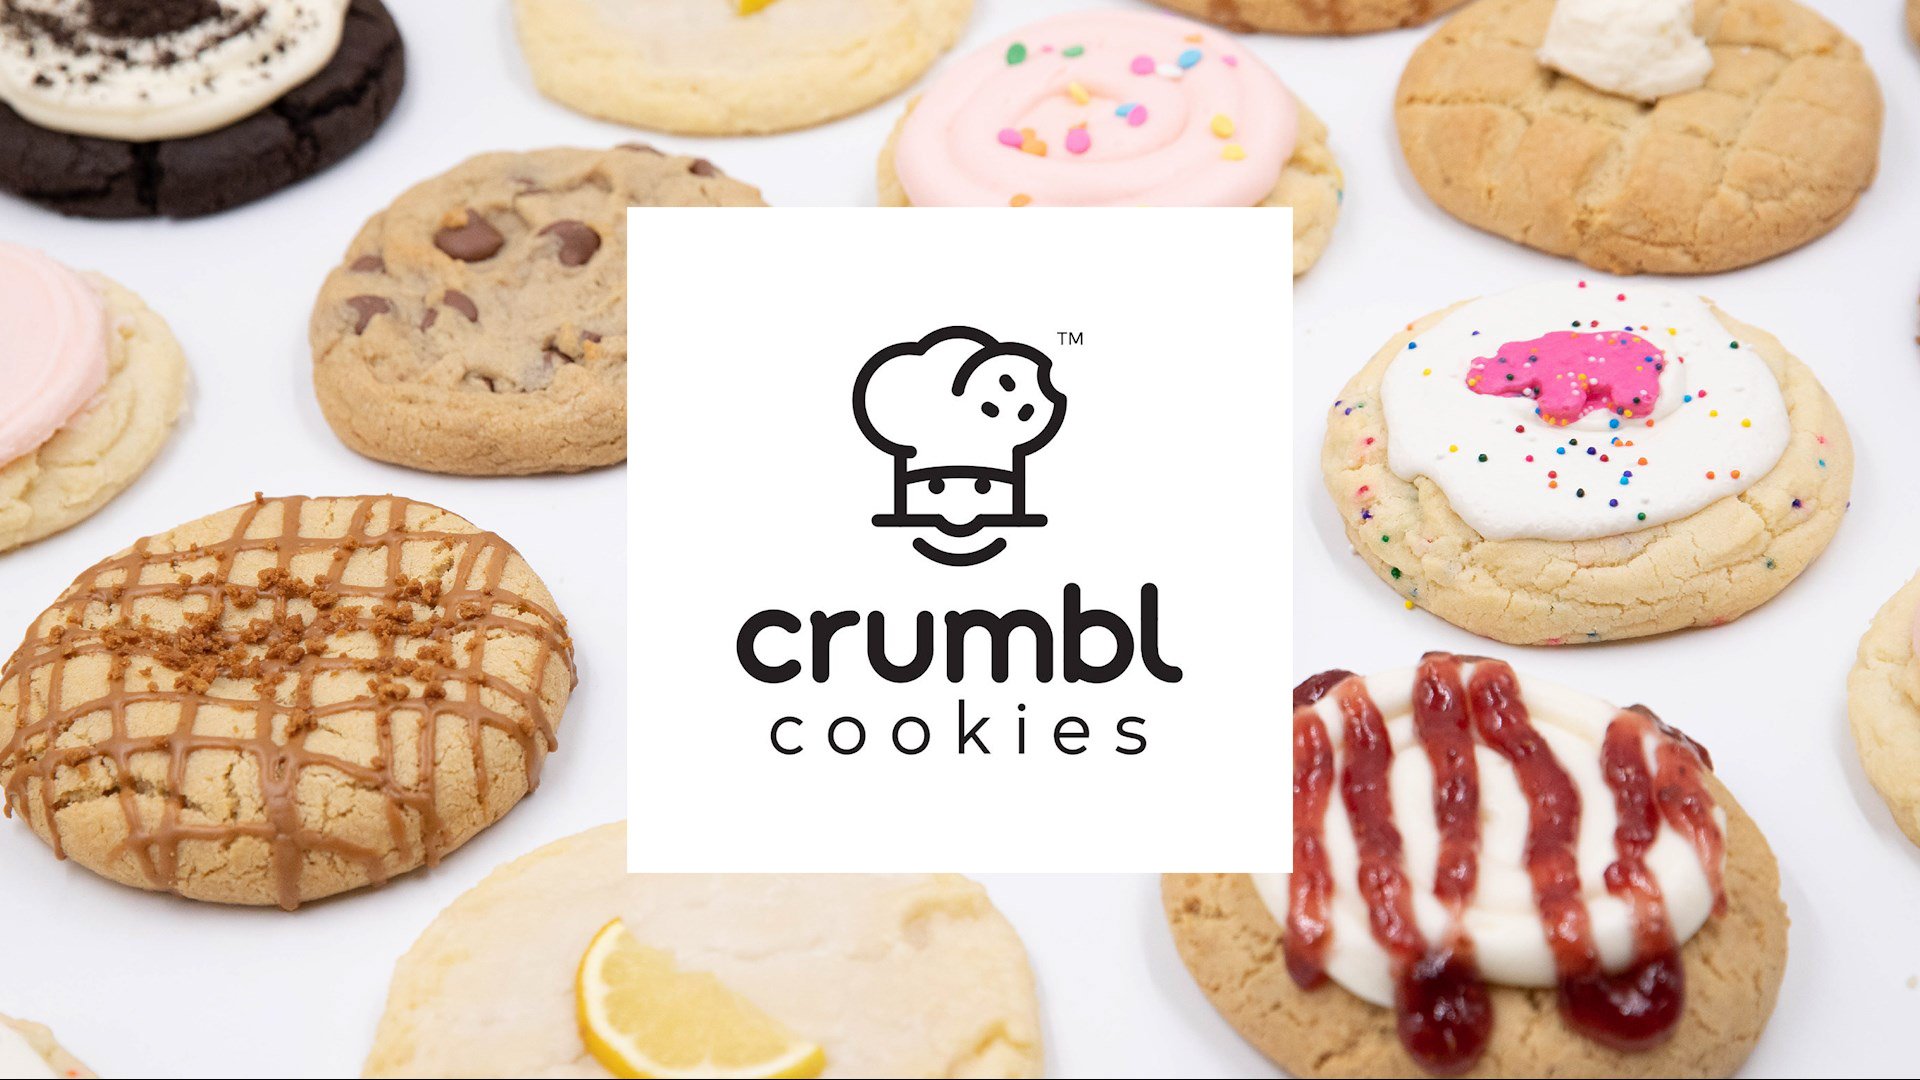 Satisfy Your Cookie Craving With Free Cookies All Day At "Crumbl" - WCCB Charlotte's CW